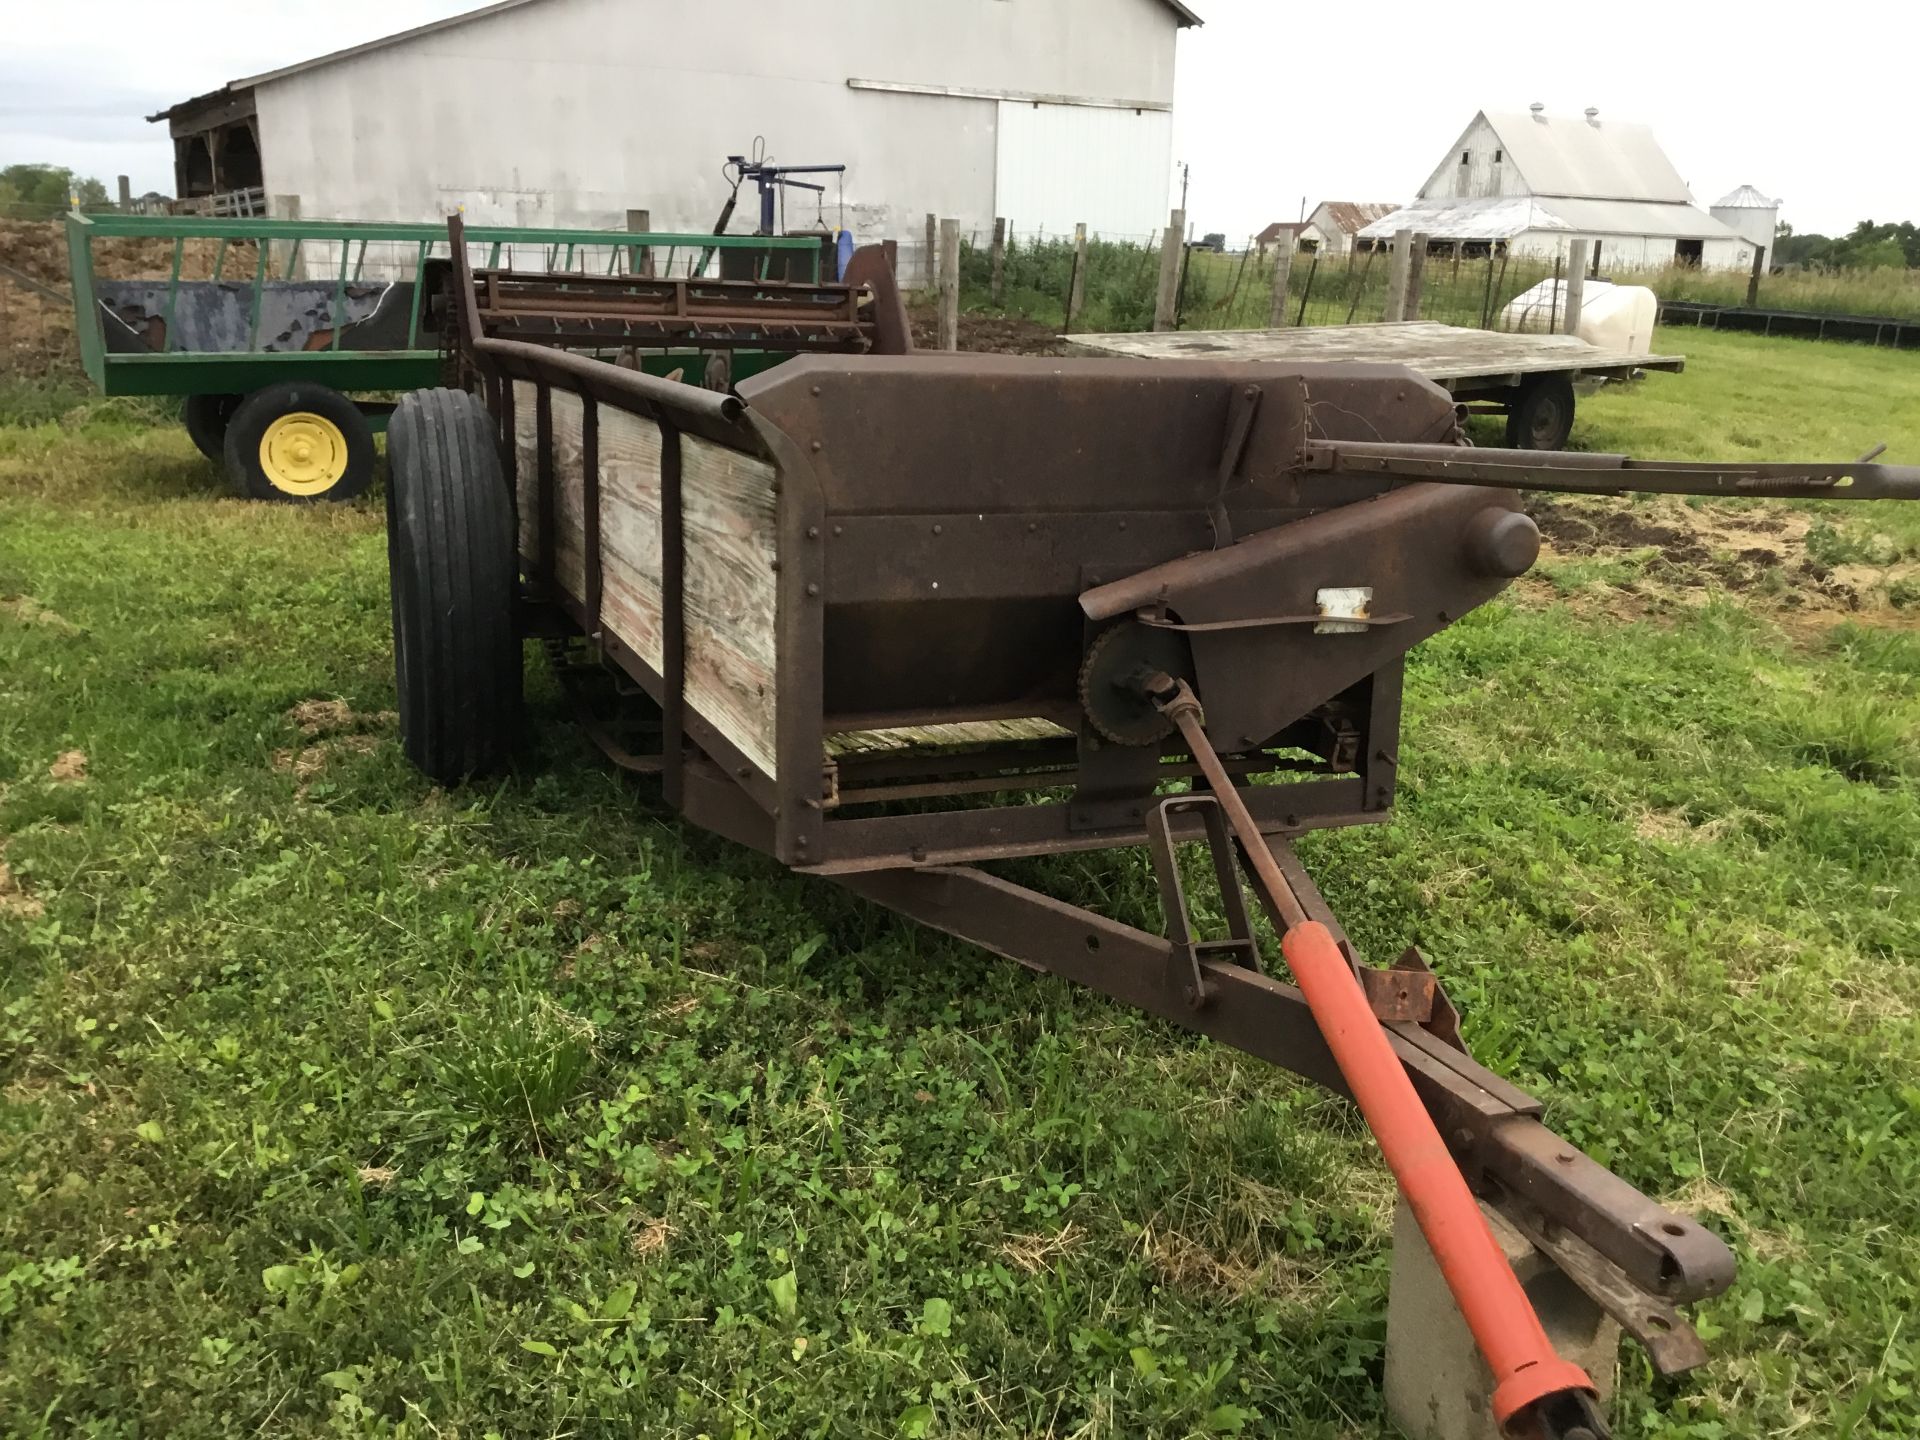 New Idea Manure Spreader, Wood Sides, 3 Beaters